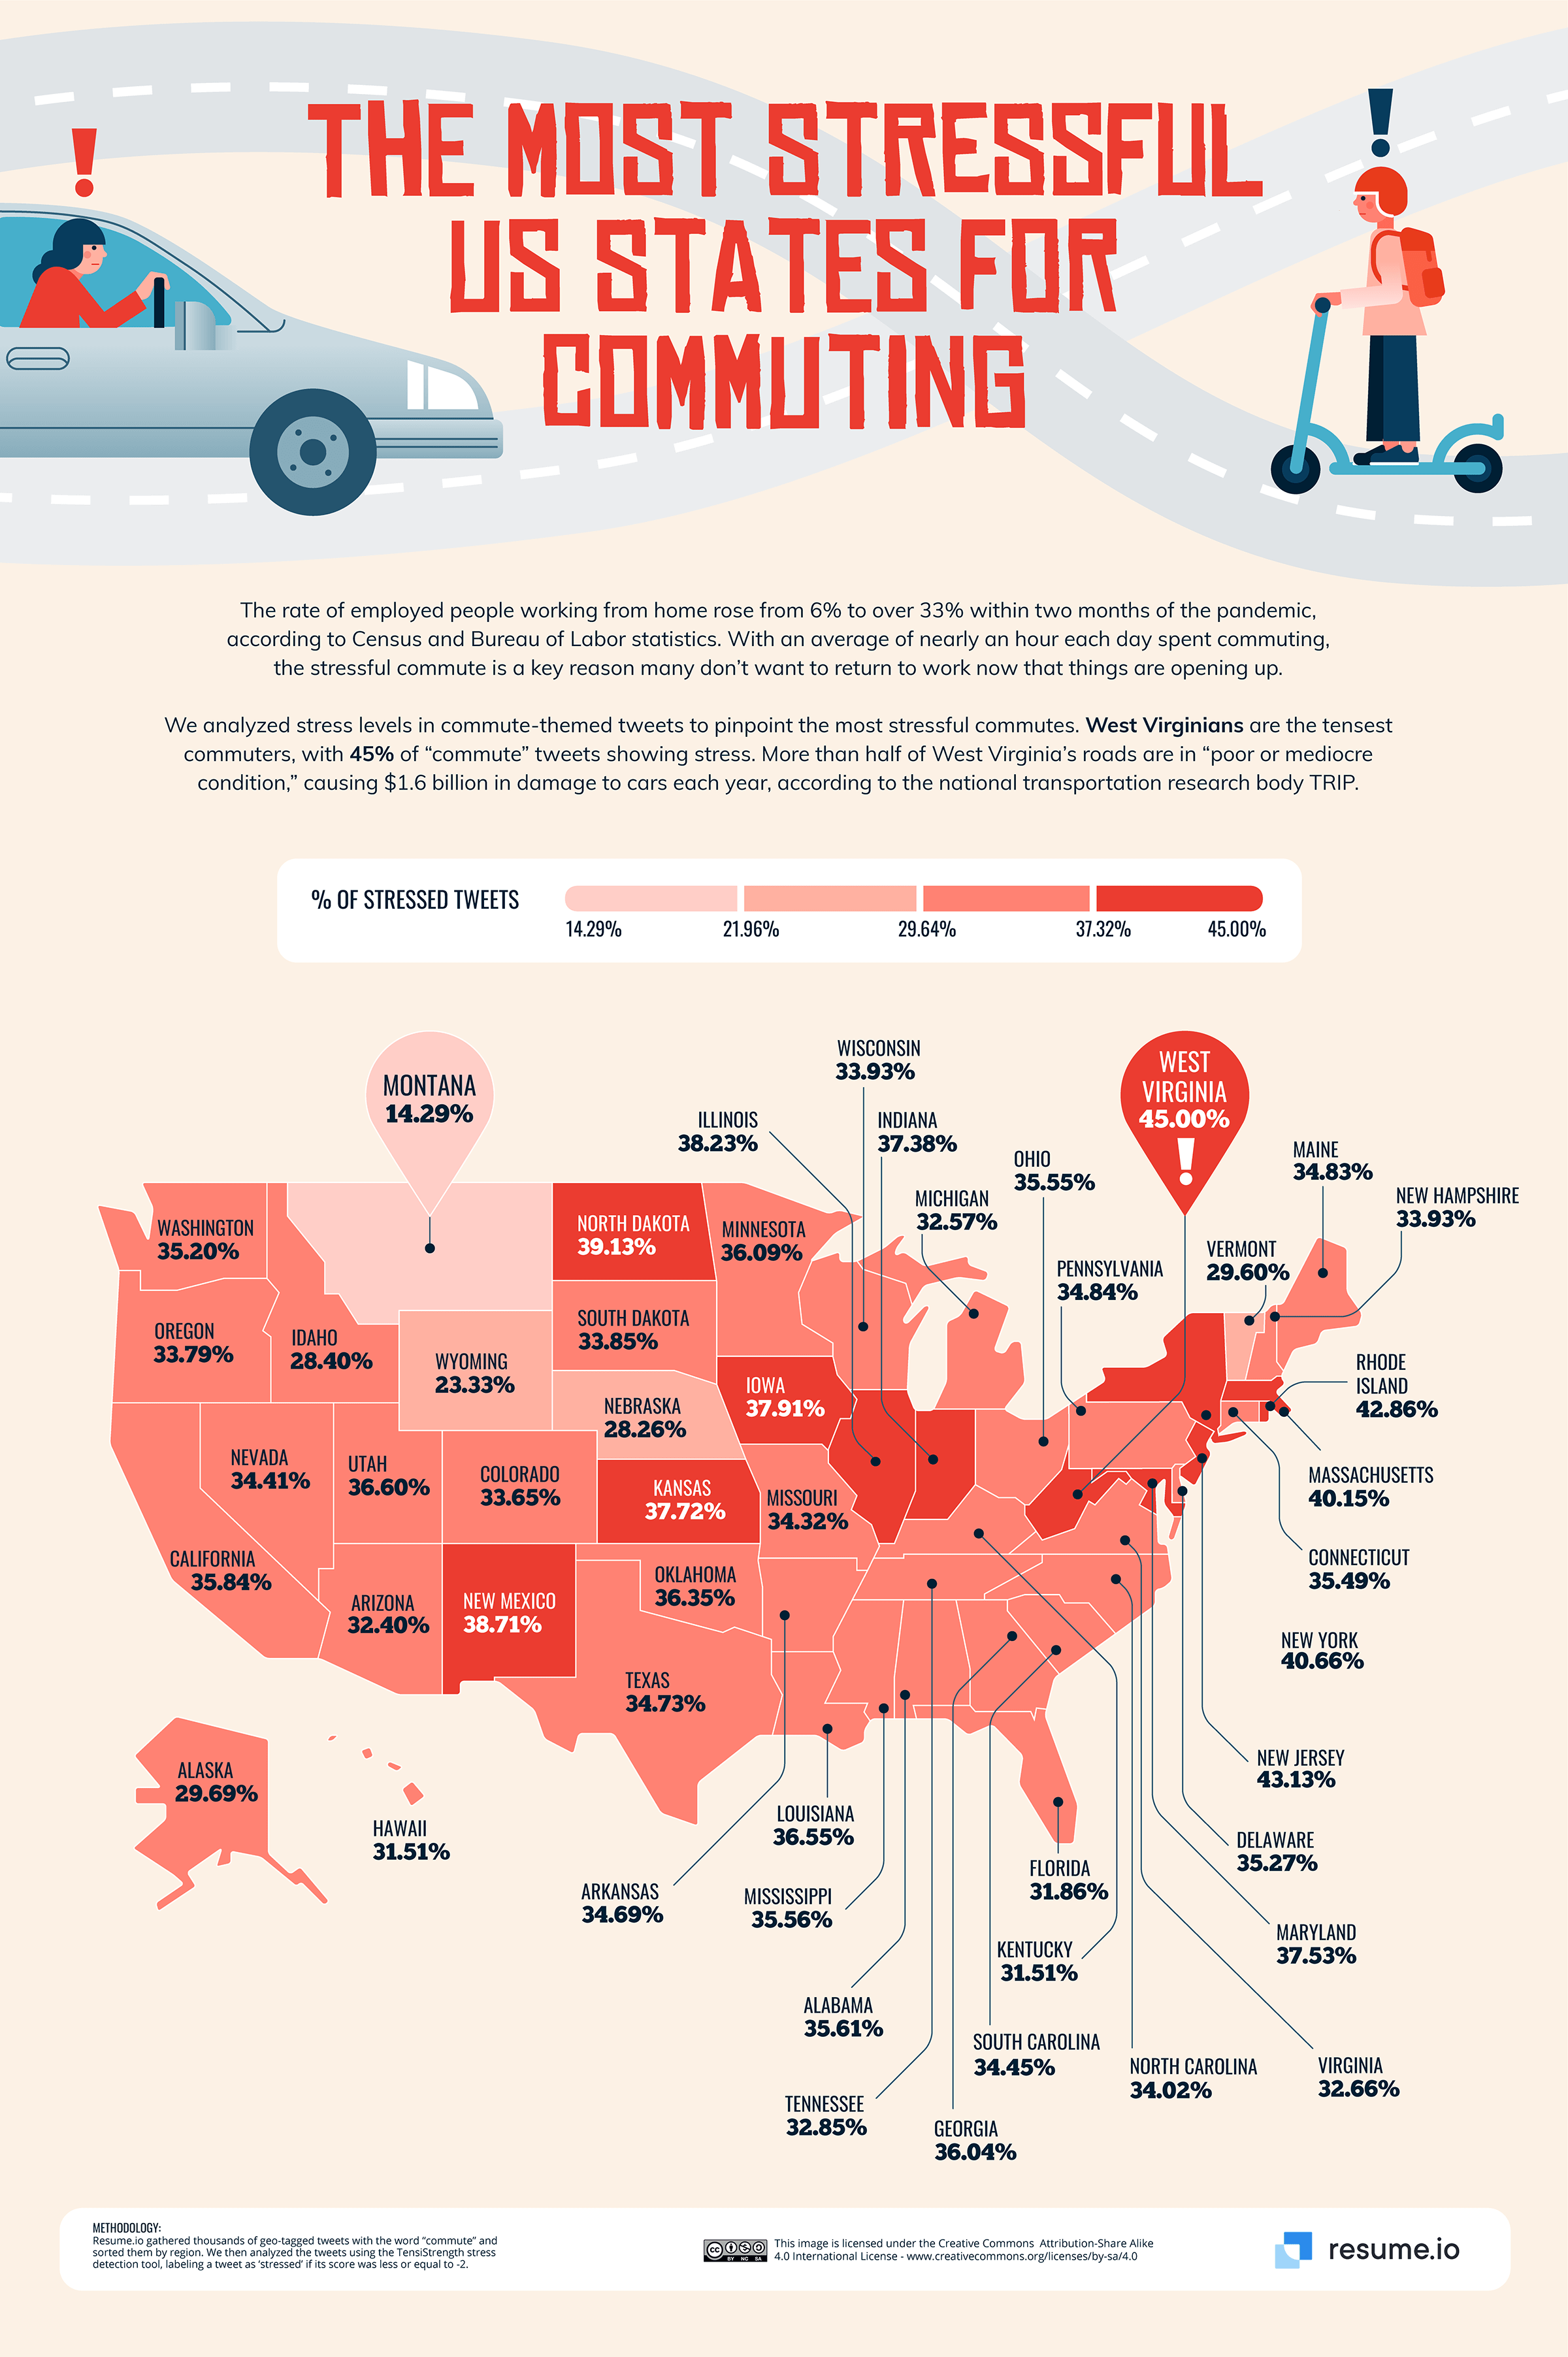 The most stressful US States for commuting.